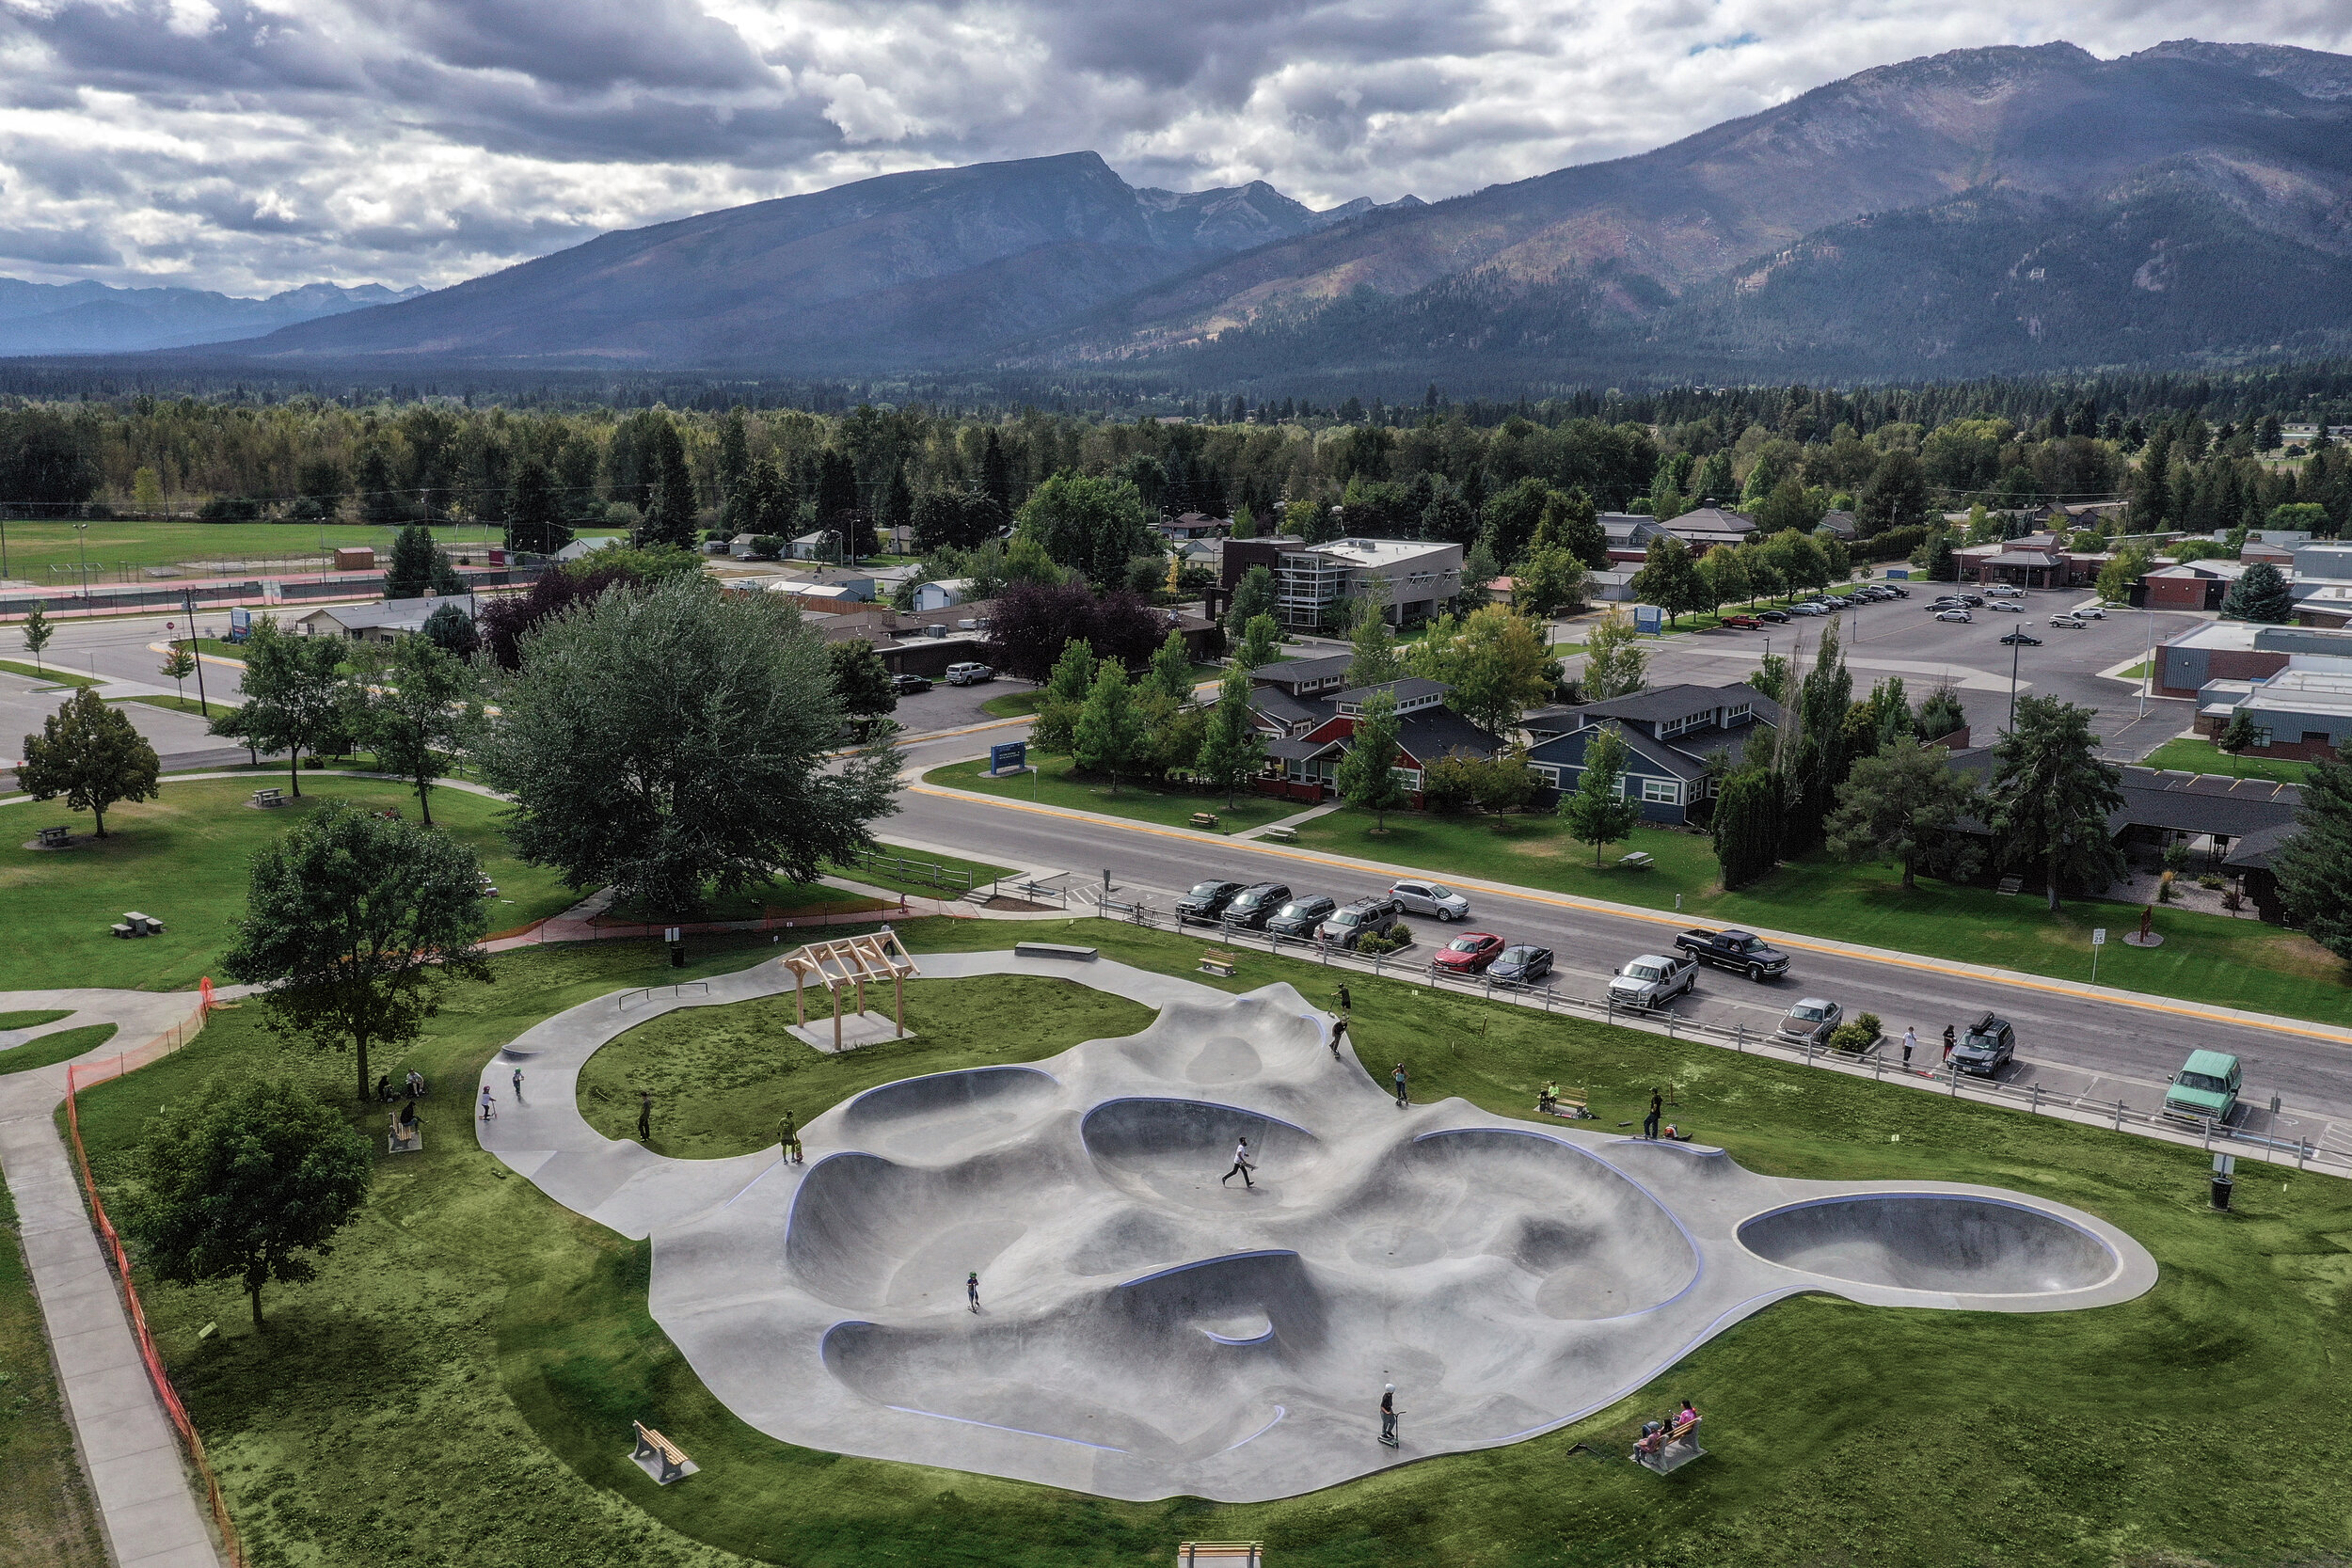 One of our favorites from 2019 - Hamilton, Montana 💯 park features a fun #montanapoolservice pool, moonscape &amp; ‘Sprack track’